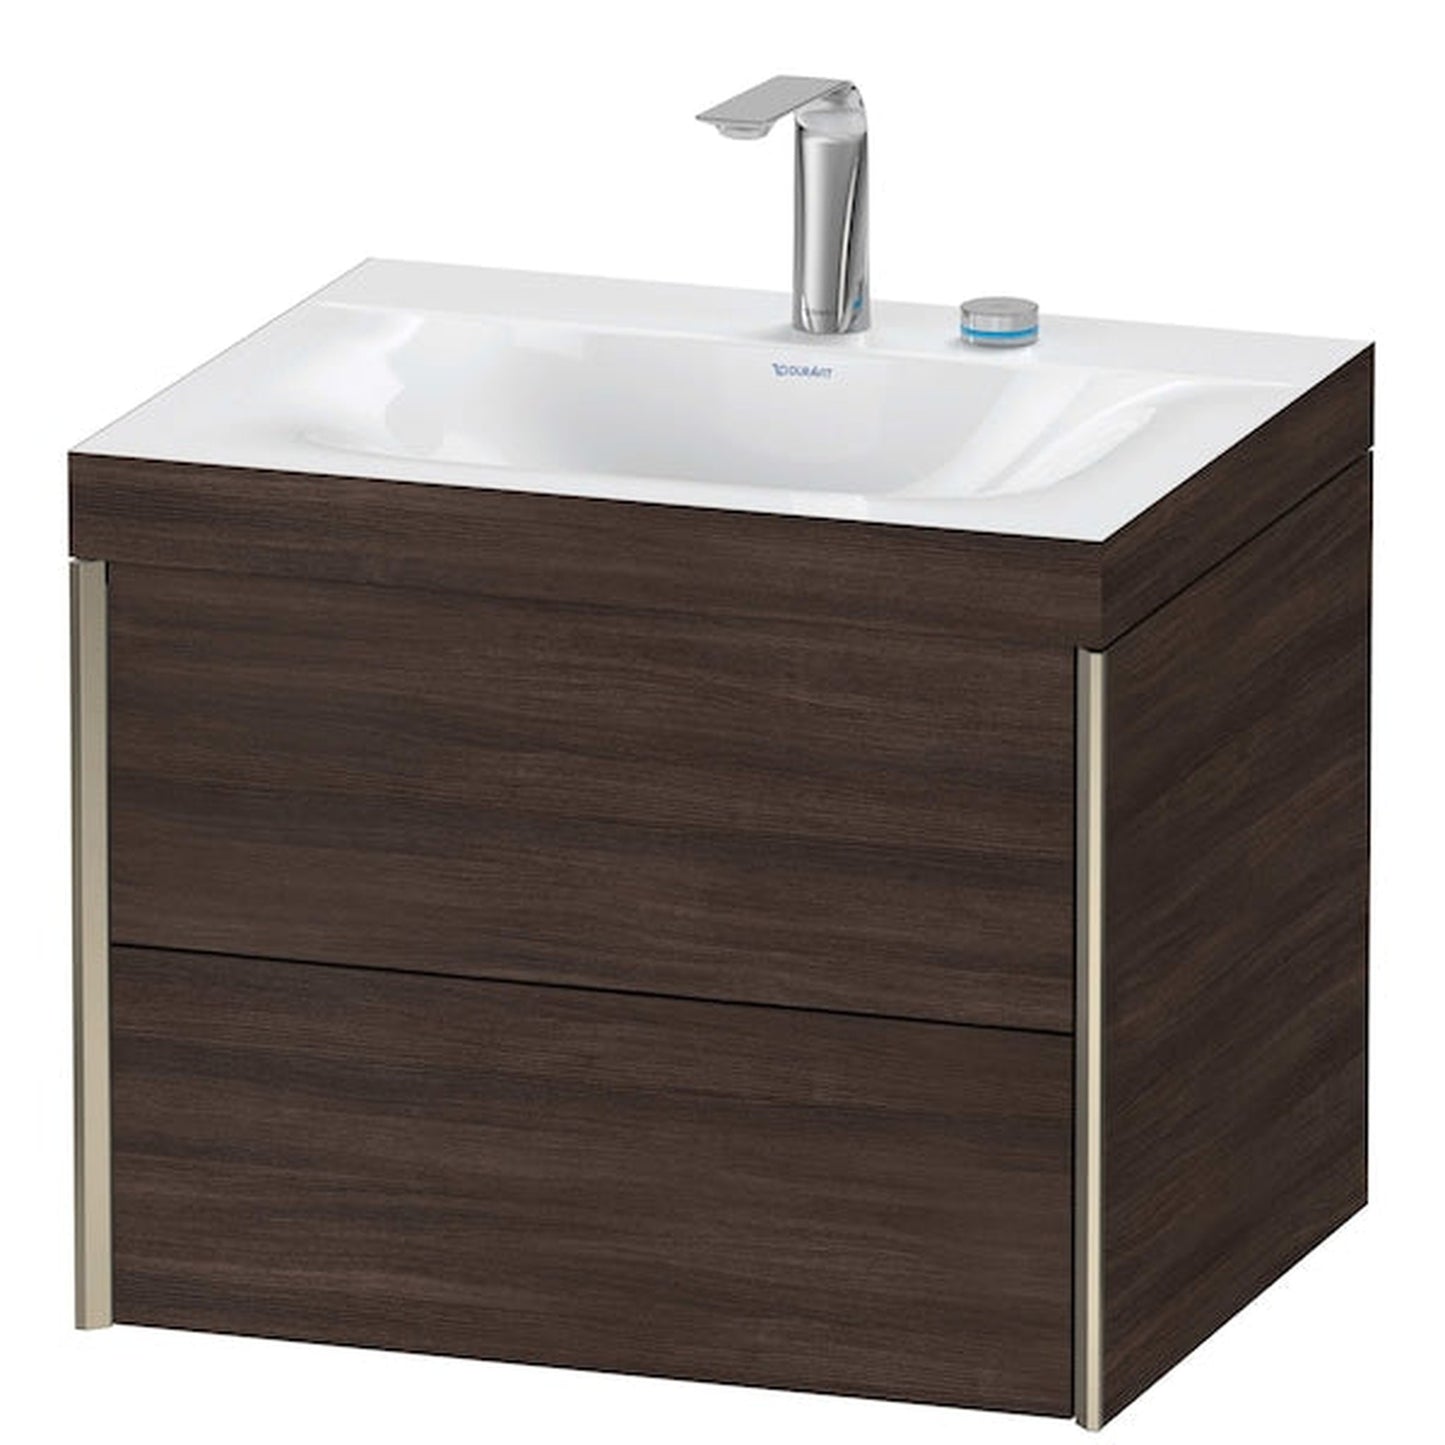 Duravit Xviu 24" x 20" x 19" Two Drawer C-Bonded Wall-Mount Vanity Kit With Two Tap Holes, Chestnut Dark (XV4614EB153C)